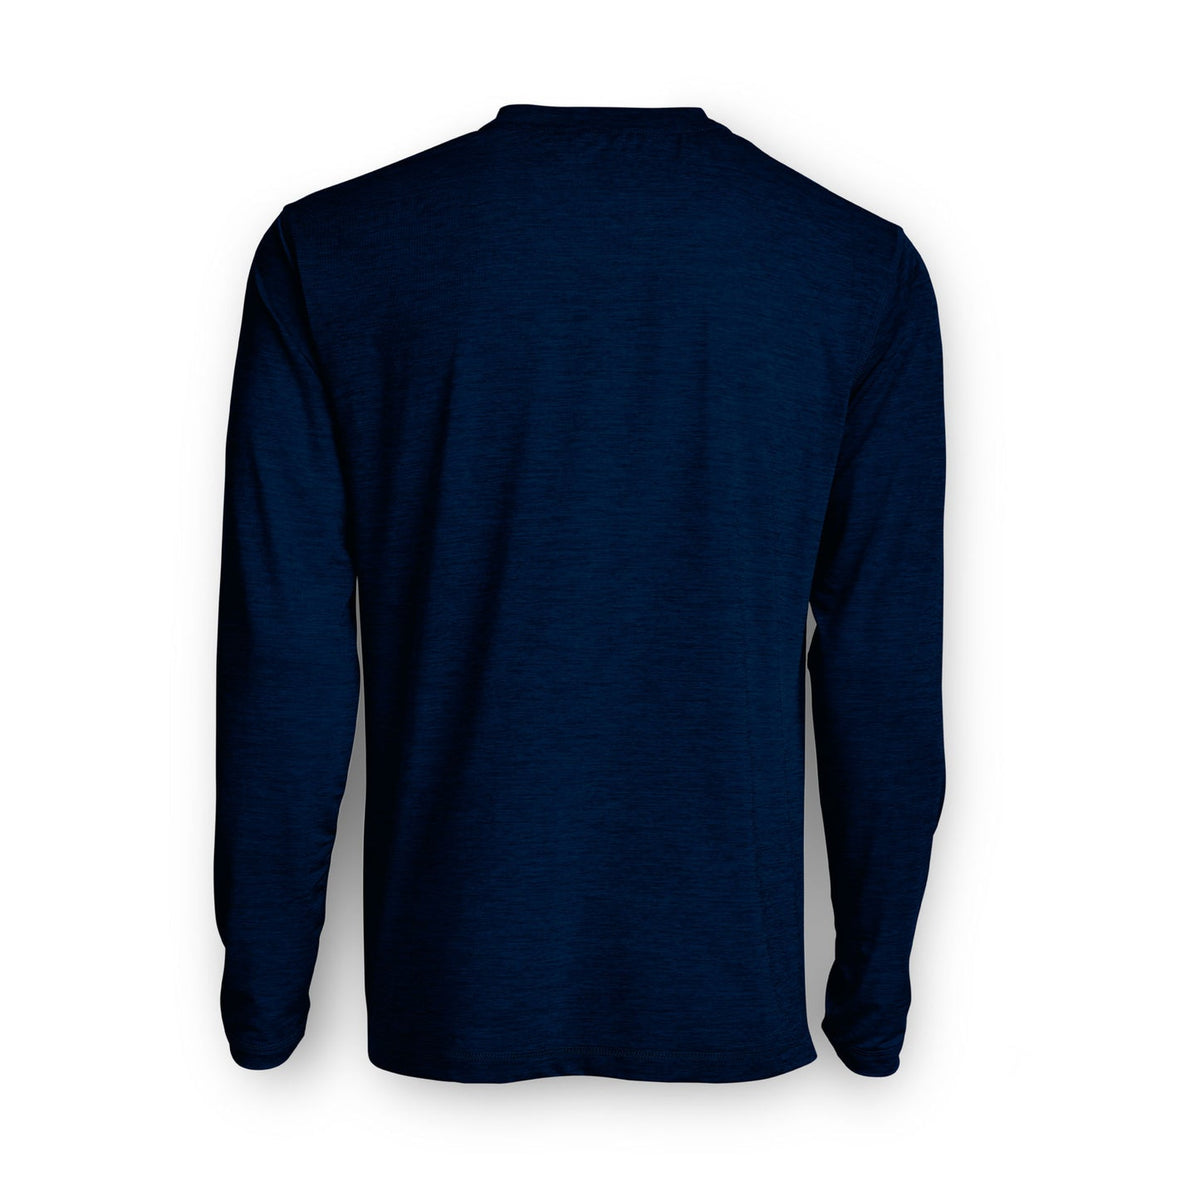 SCALES Iconic Long Sleeve Active Performance